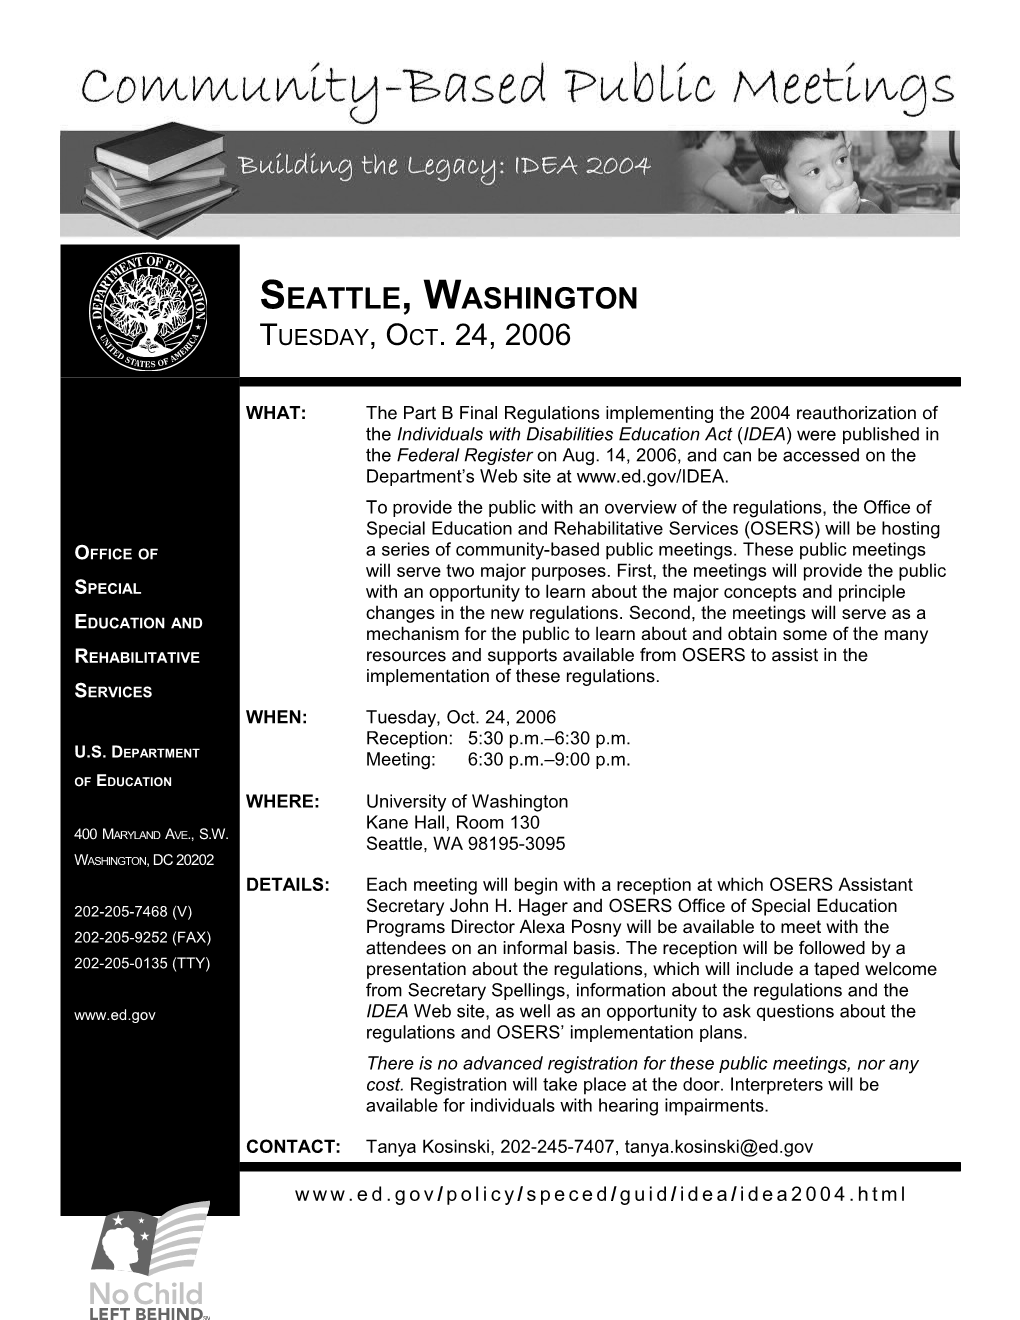 Building the Legacy: IDEA 2004 Community-Based Public Meetings, Flyer for Seattle, WA (MS Word)